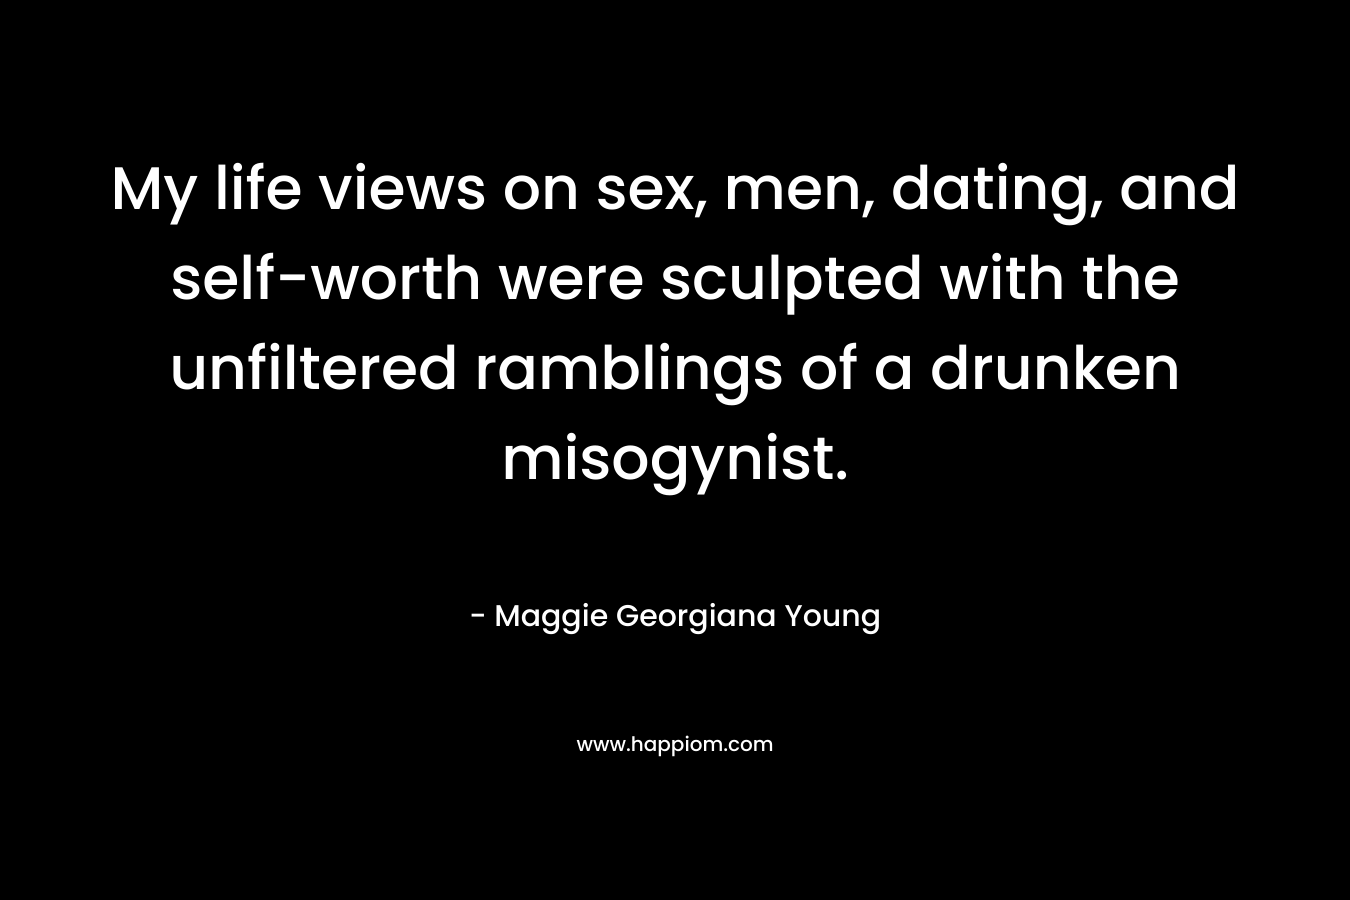 My life views on sex, men, dating, and self-worth were sculpted with the unfiltered ramblings of a drunken misogynist. – Maggie Georgiana Young